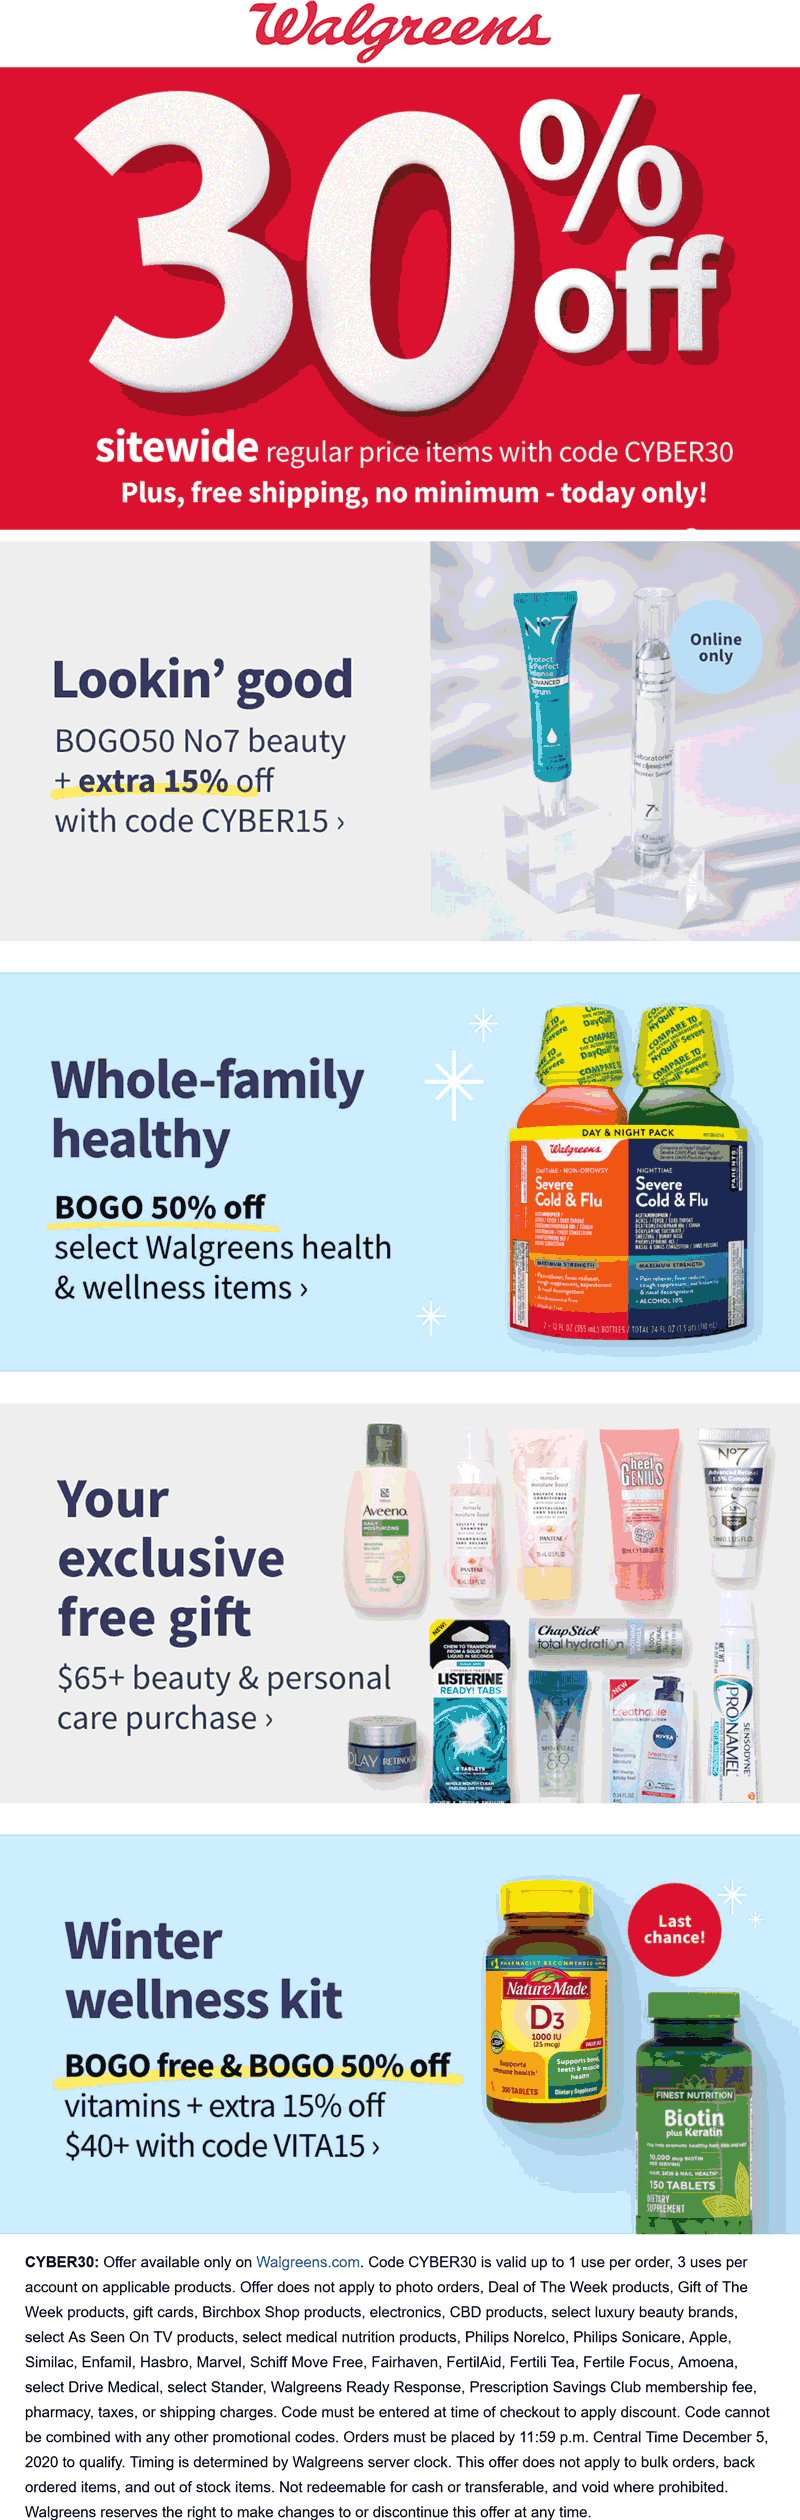 Walgreens stores Coupon  30% off everything & more online today at Walgreens via promo code CYBER30 #walgreens 